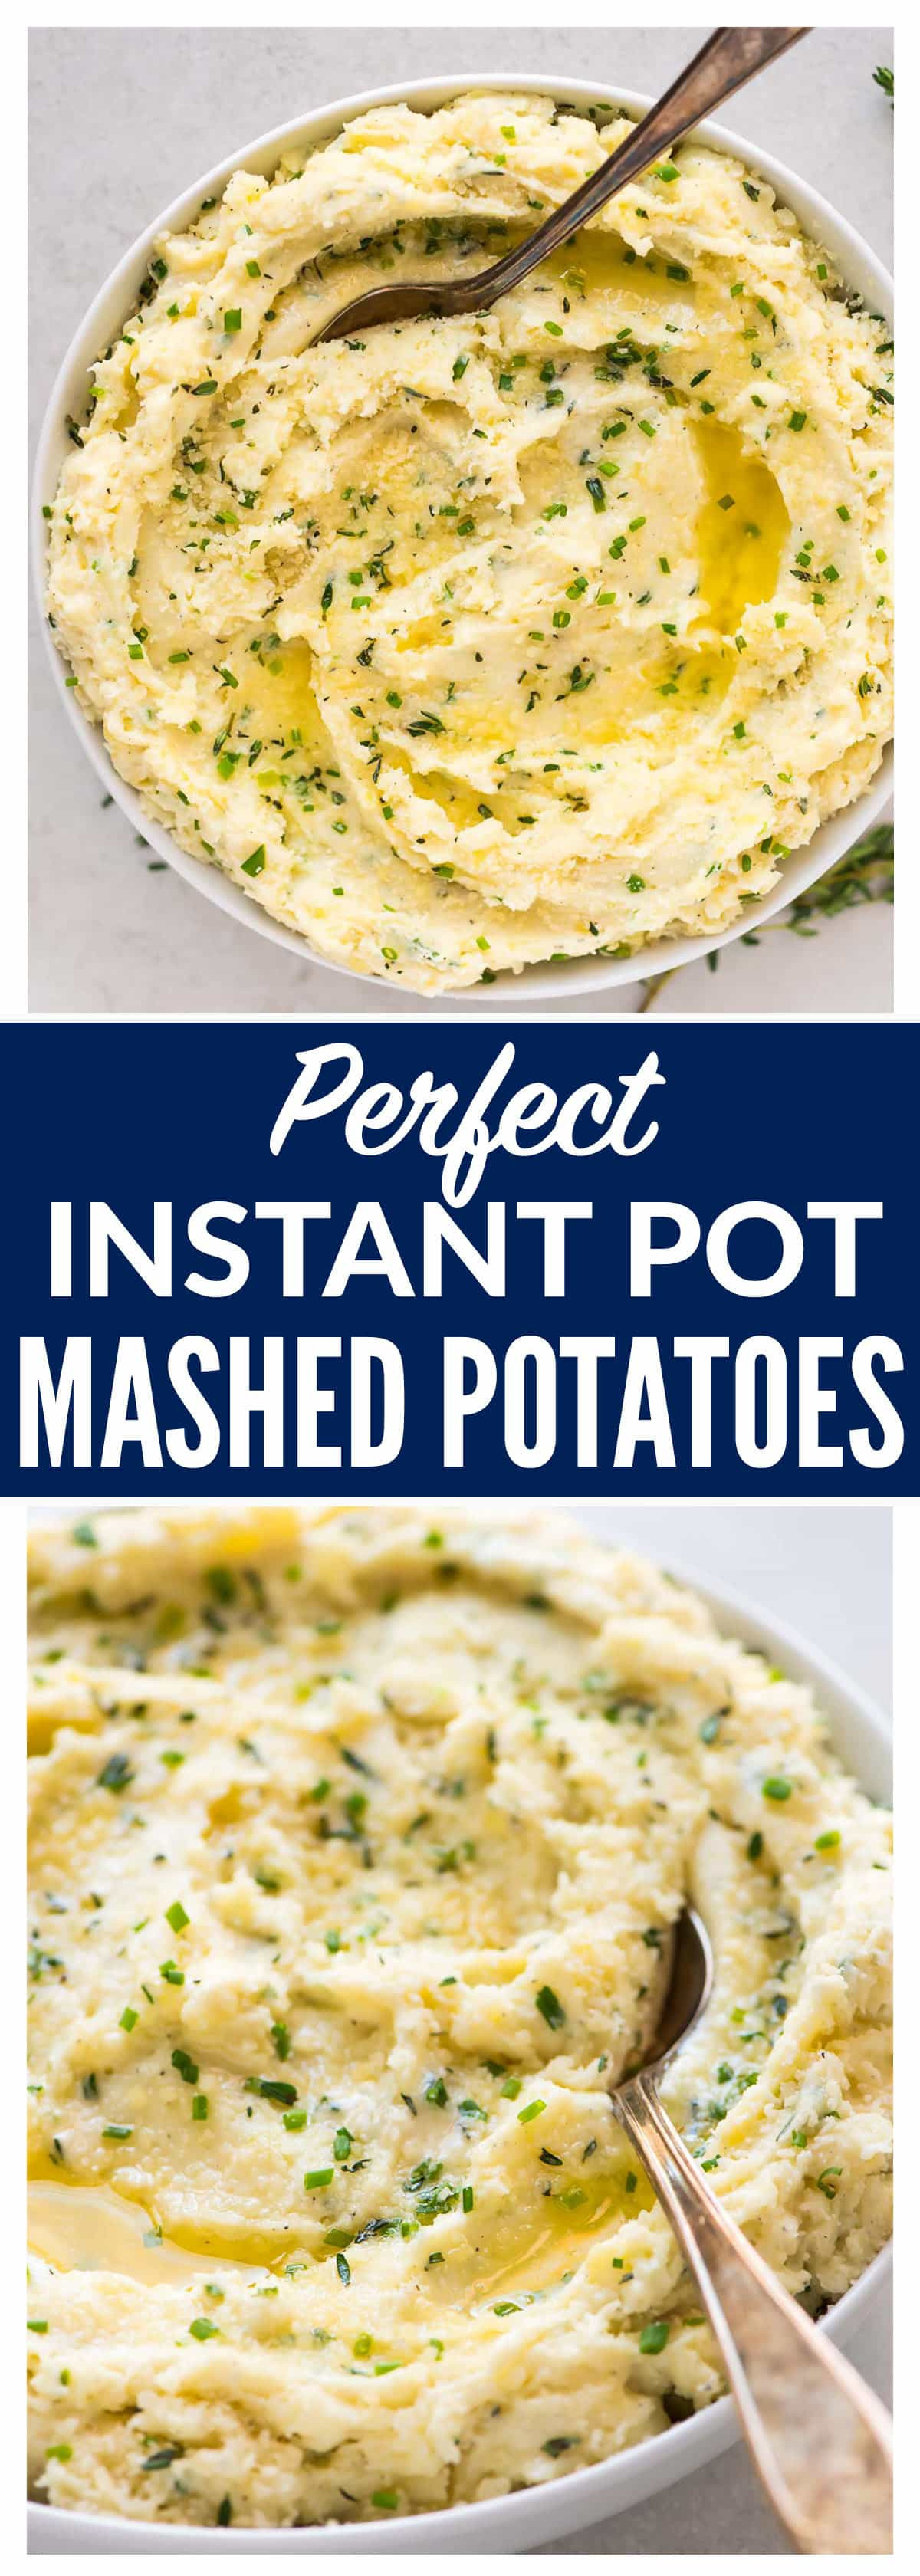 Instant Mashed Potatoes Healthy
 instant mashed potatoes healthy